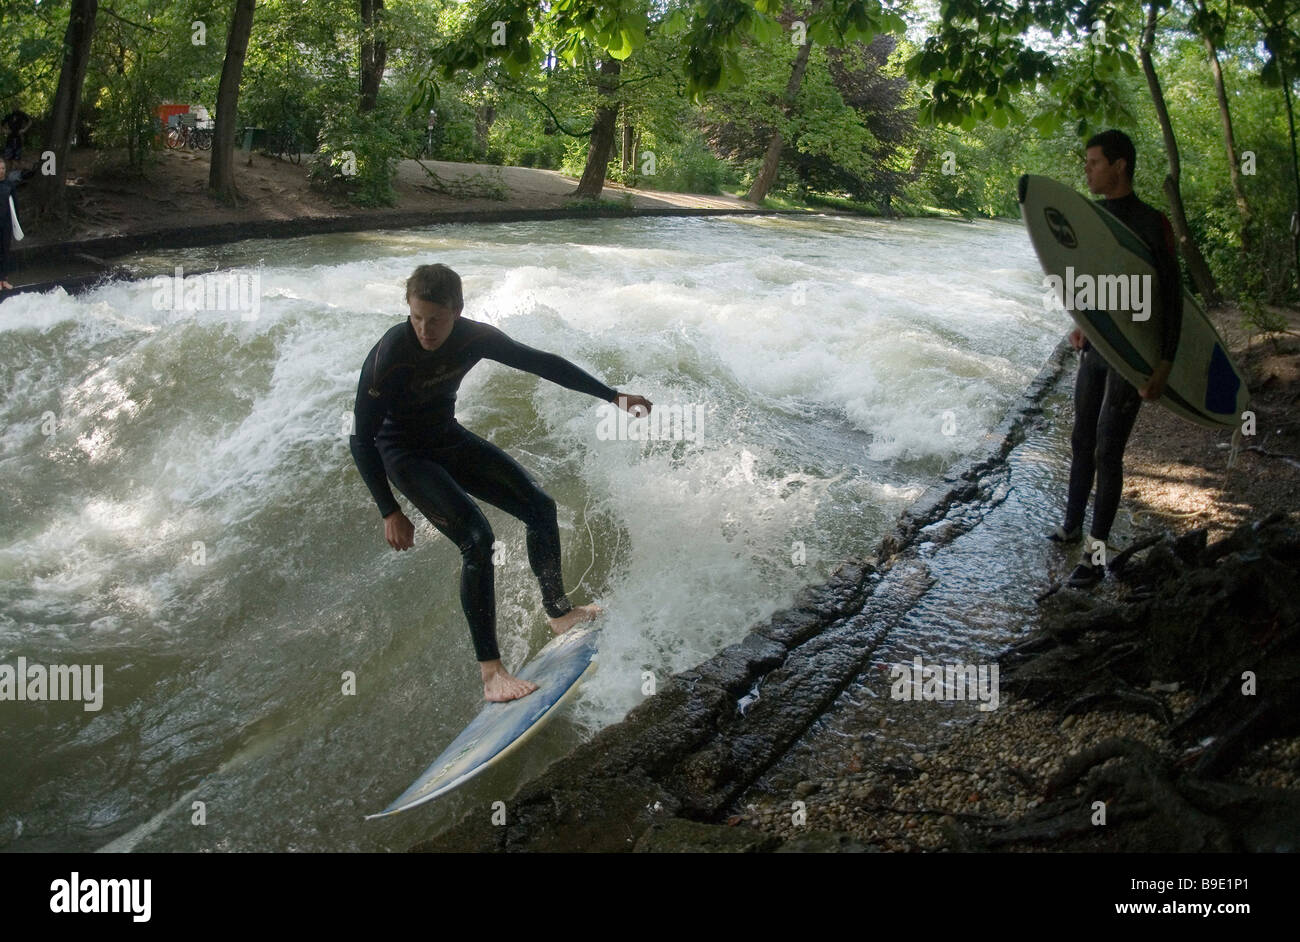 Surfer practising on the Eisbach river, Munich, Germany Stock Photo